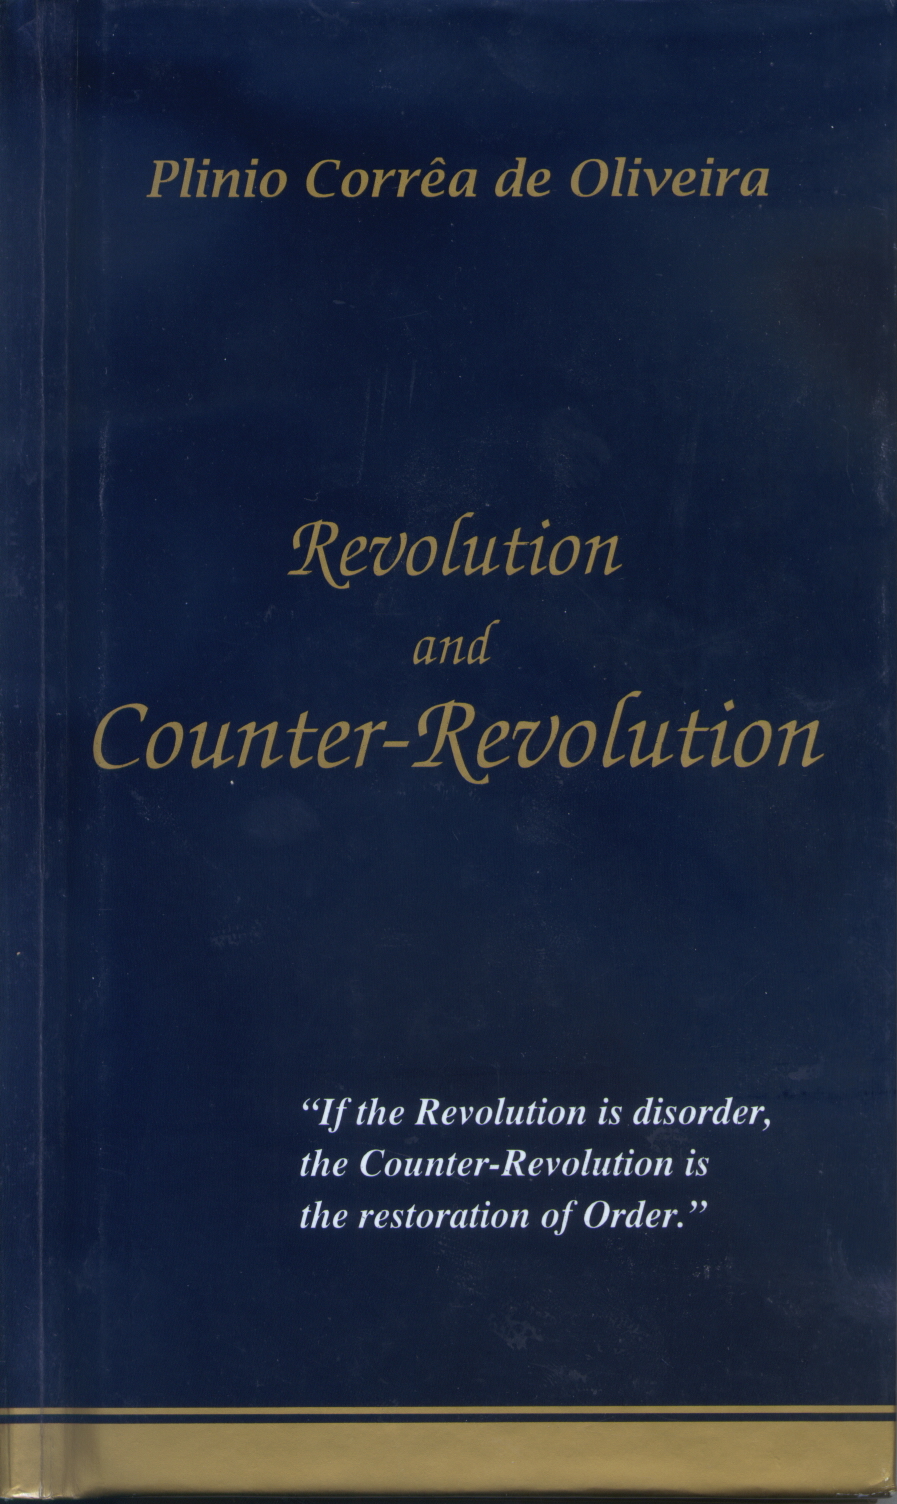 Perhaps none of his works, however, has had such a profound impact as the essay, Revolution and Counter-Revolution, translated into the world’s major languages.